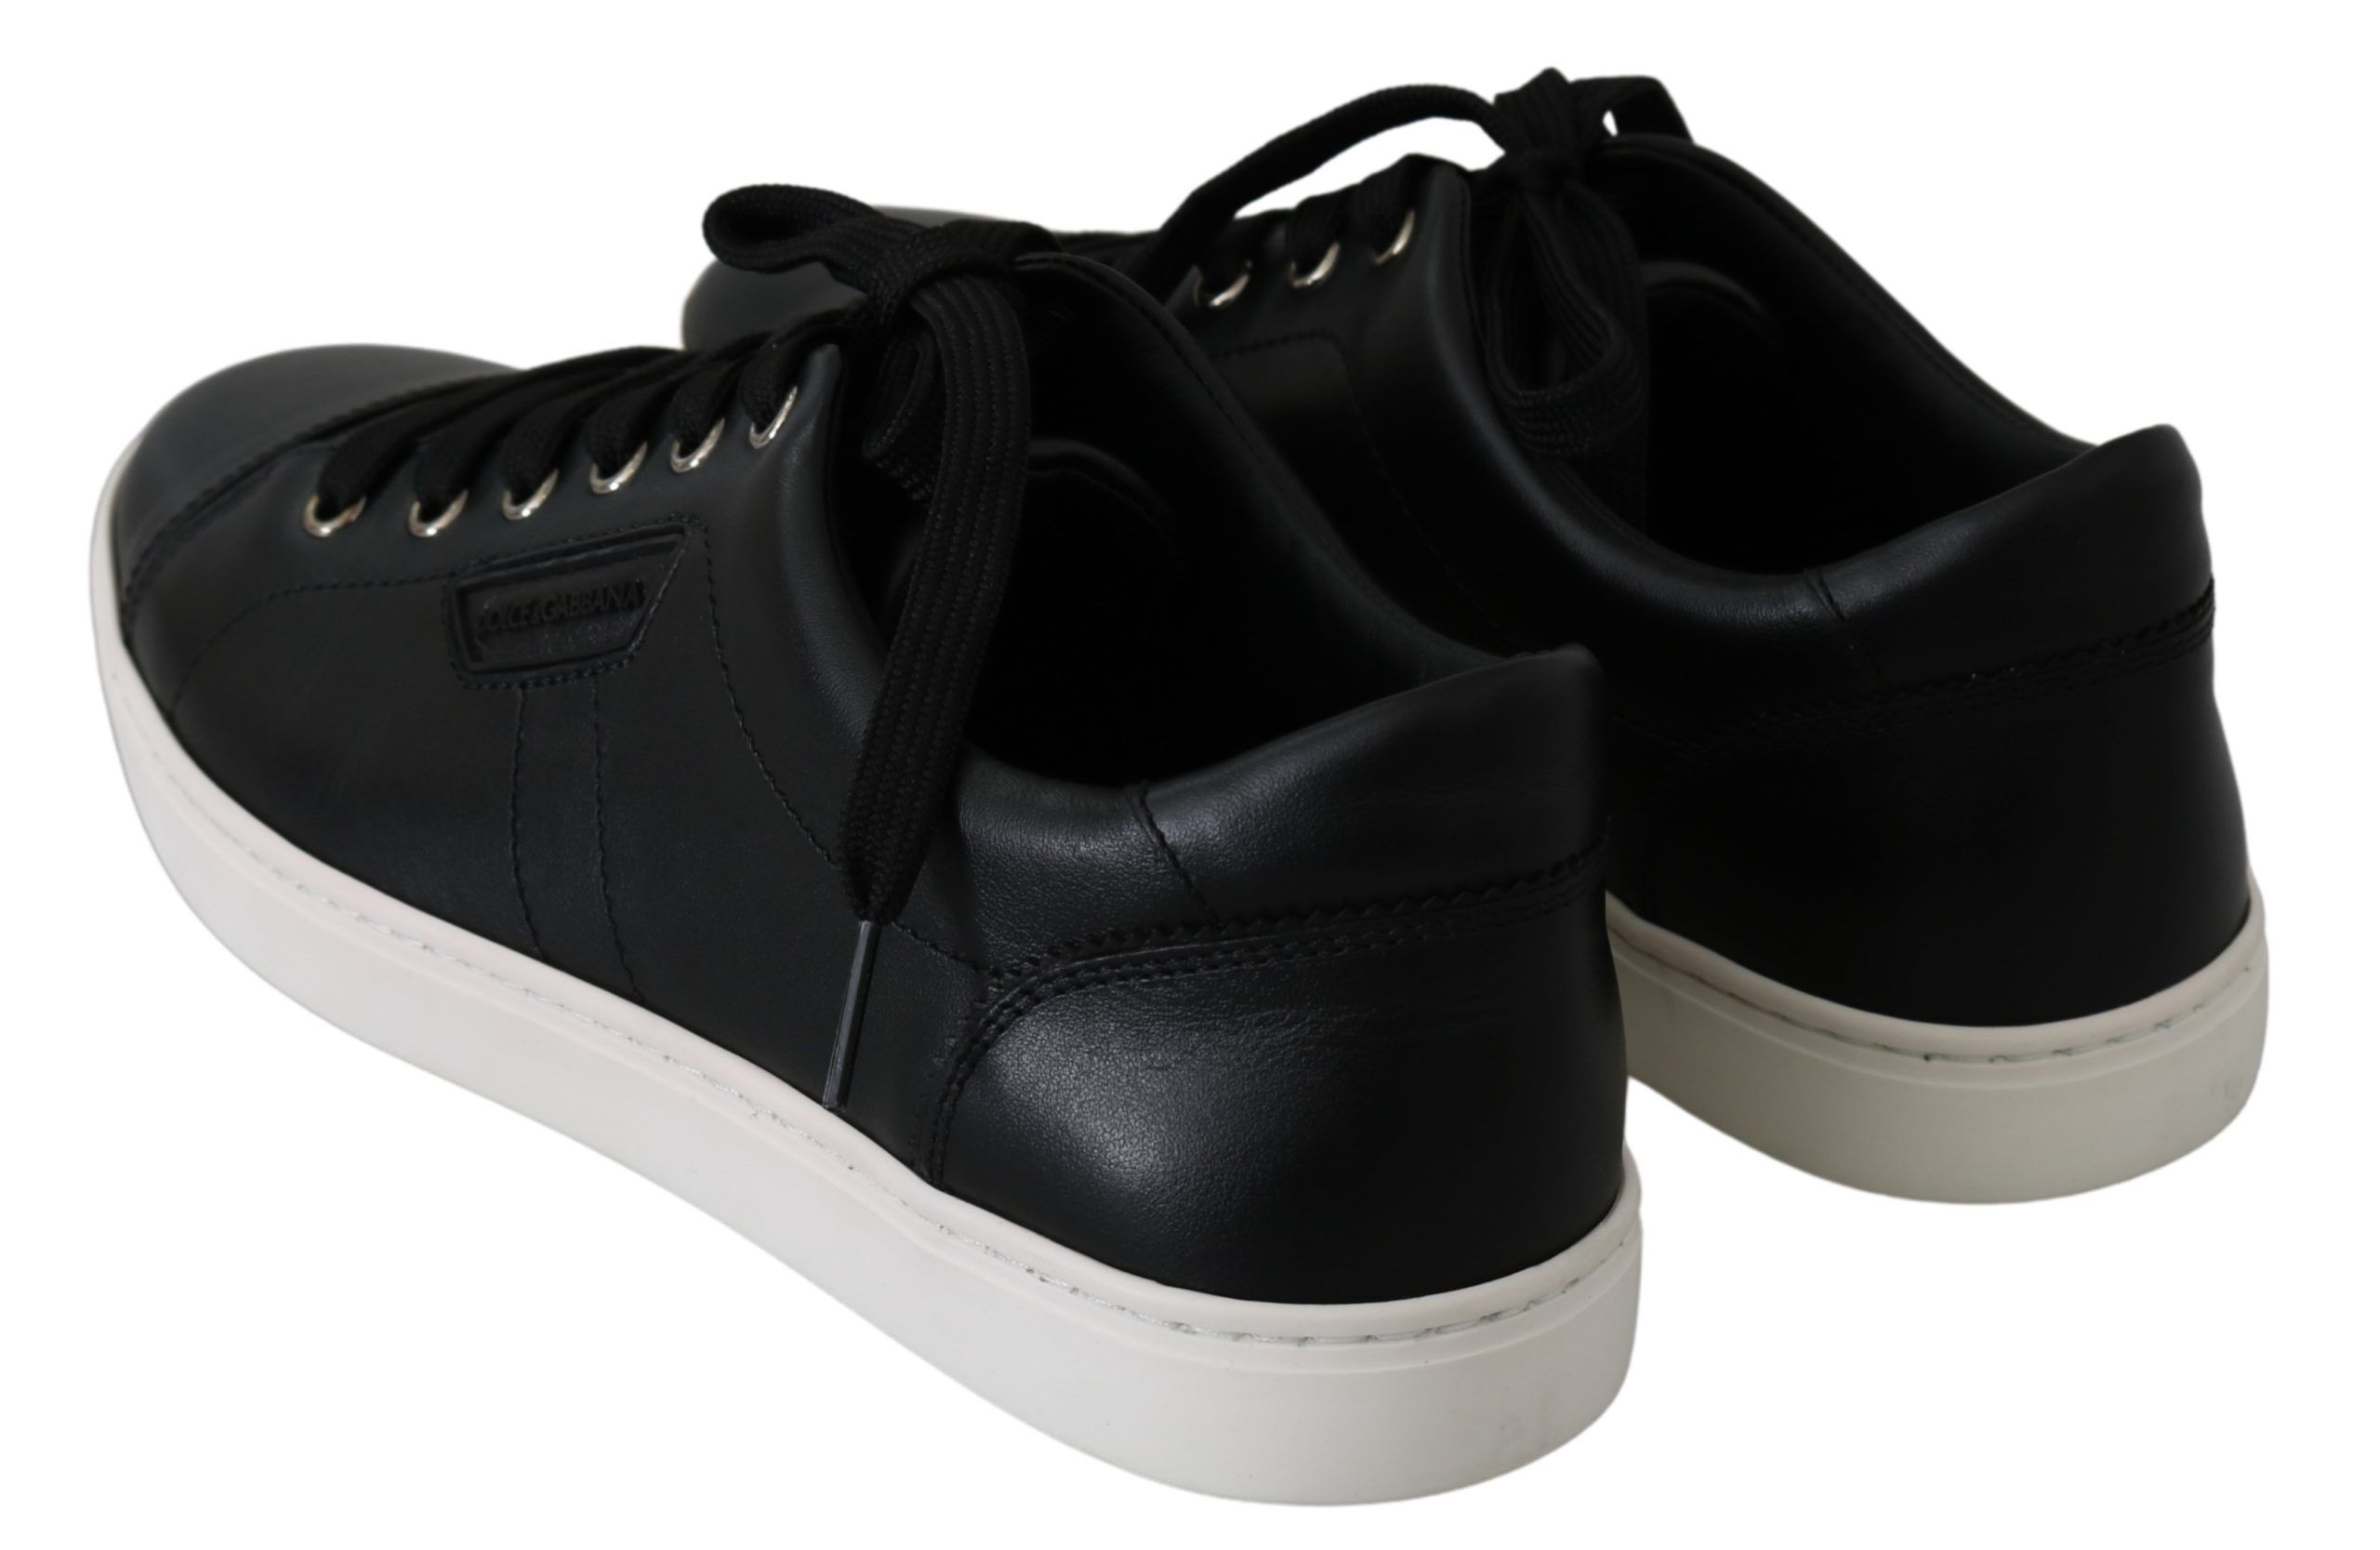 Dolce & Gabbana Black Leather Mens Casual Sneakers Shoes